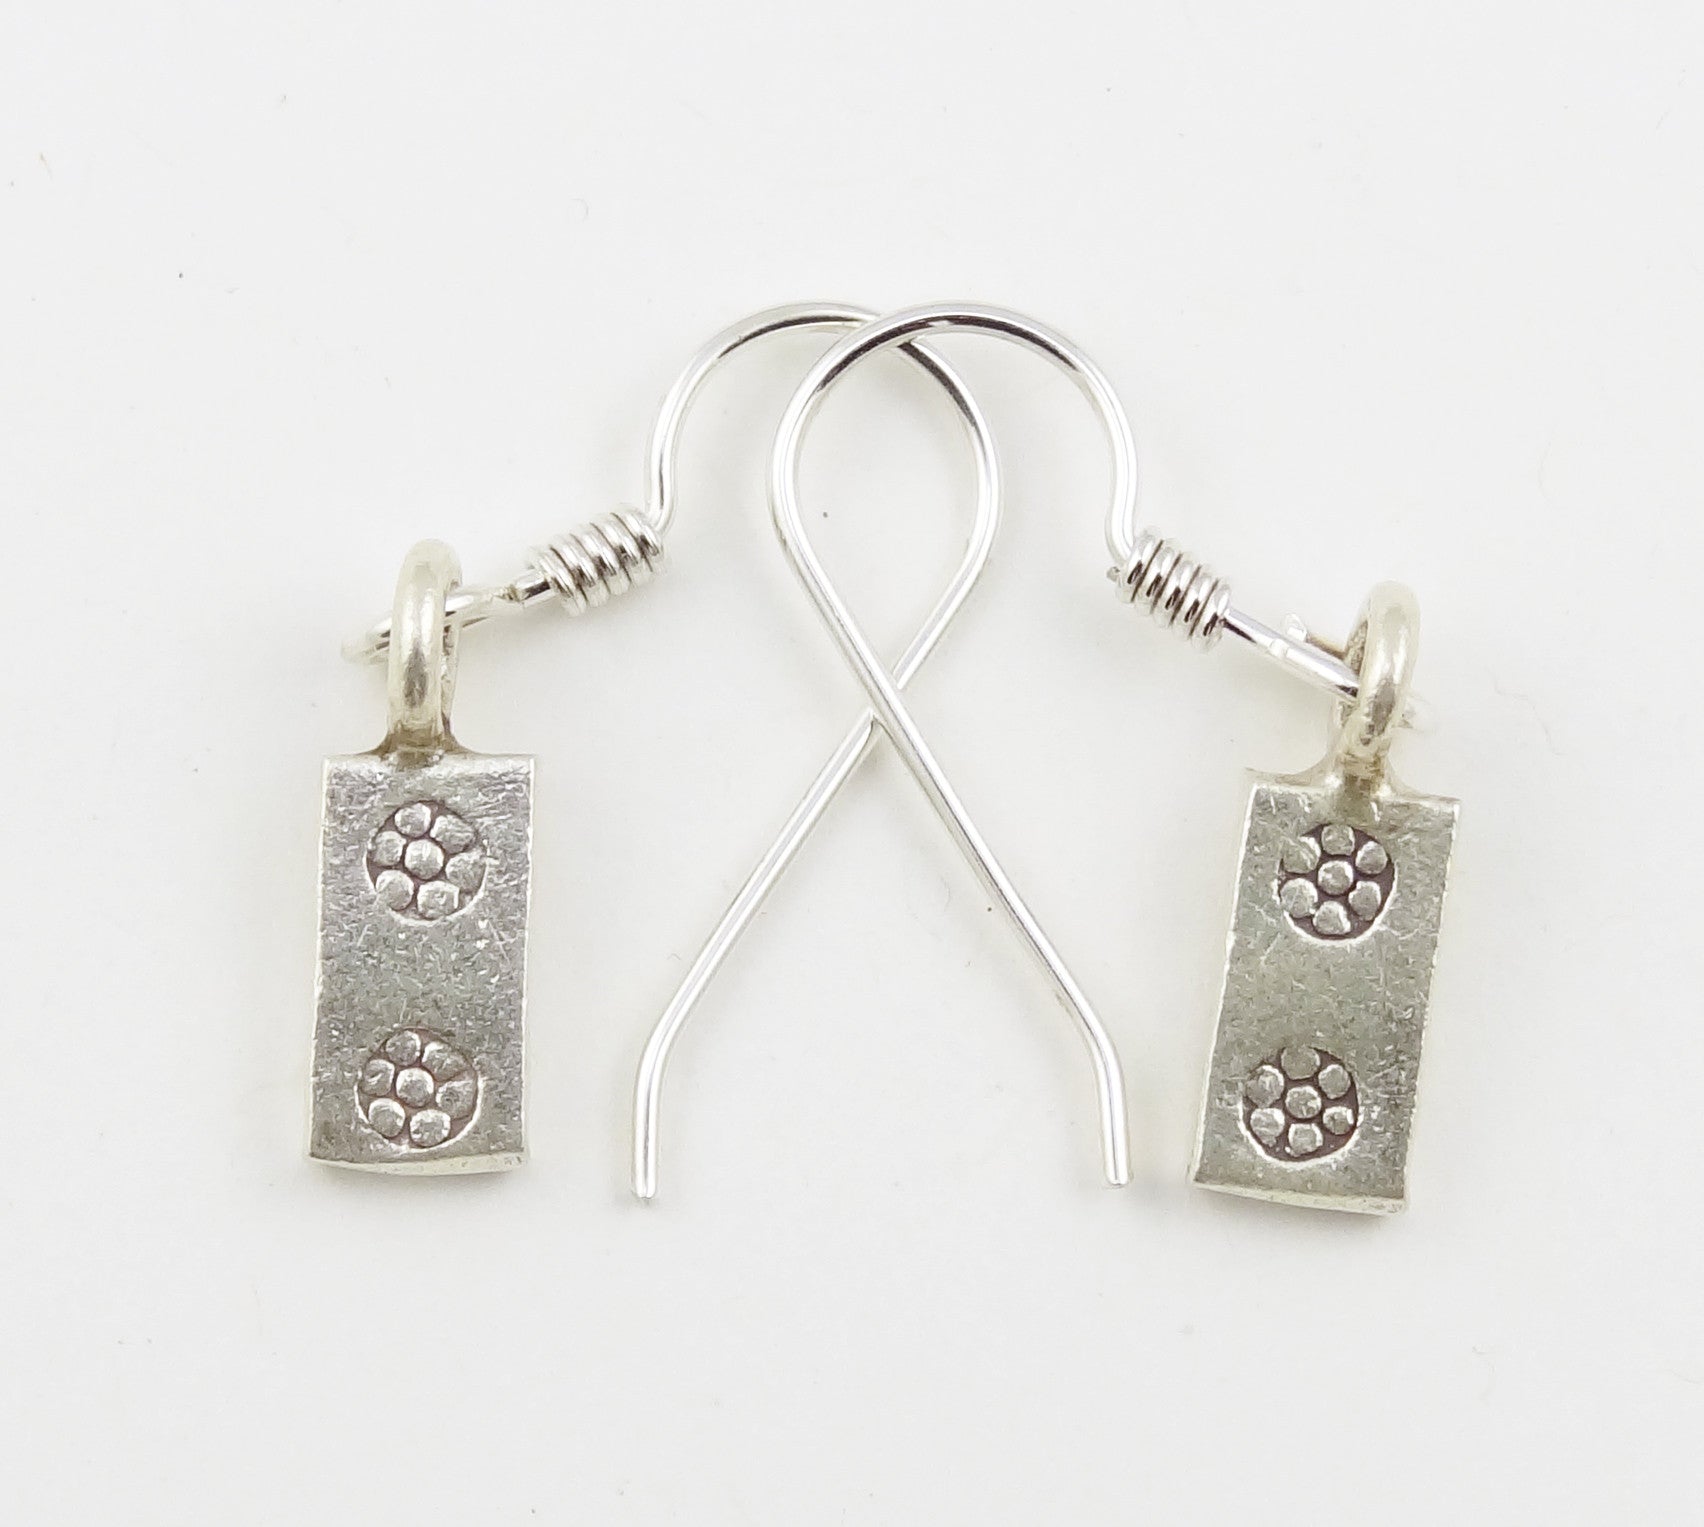 Hill Tribe Silver Stamped Rectangle Earrings